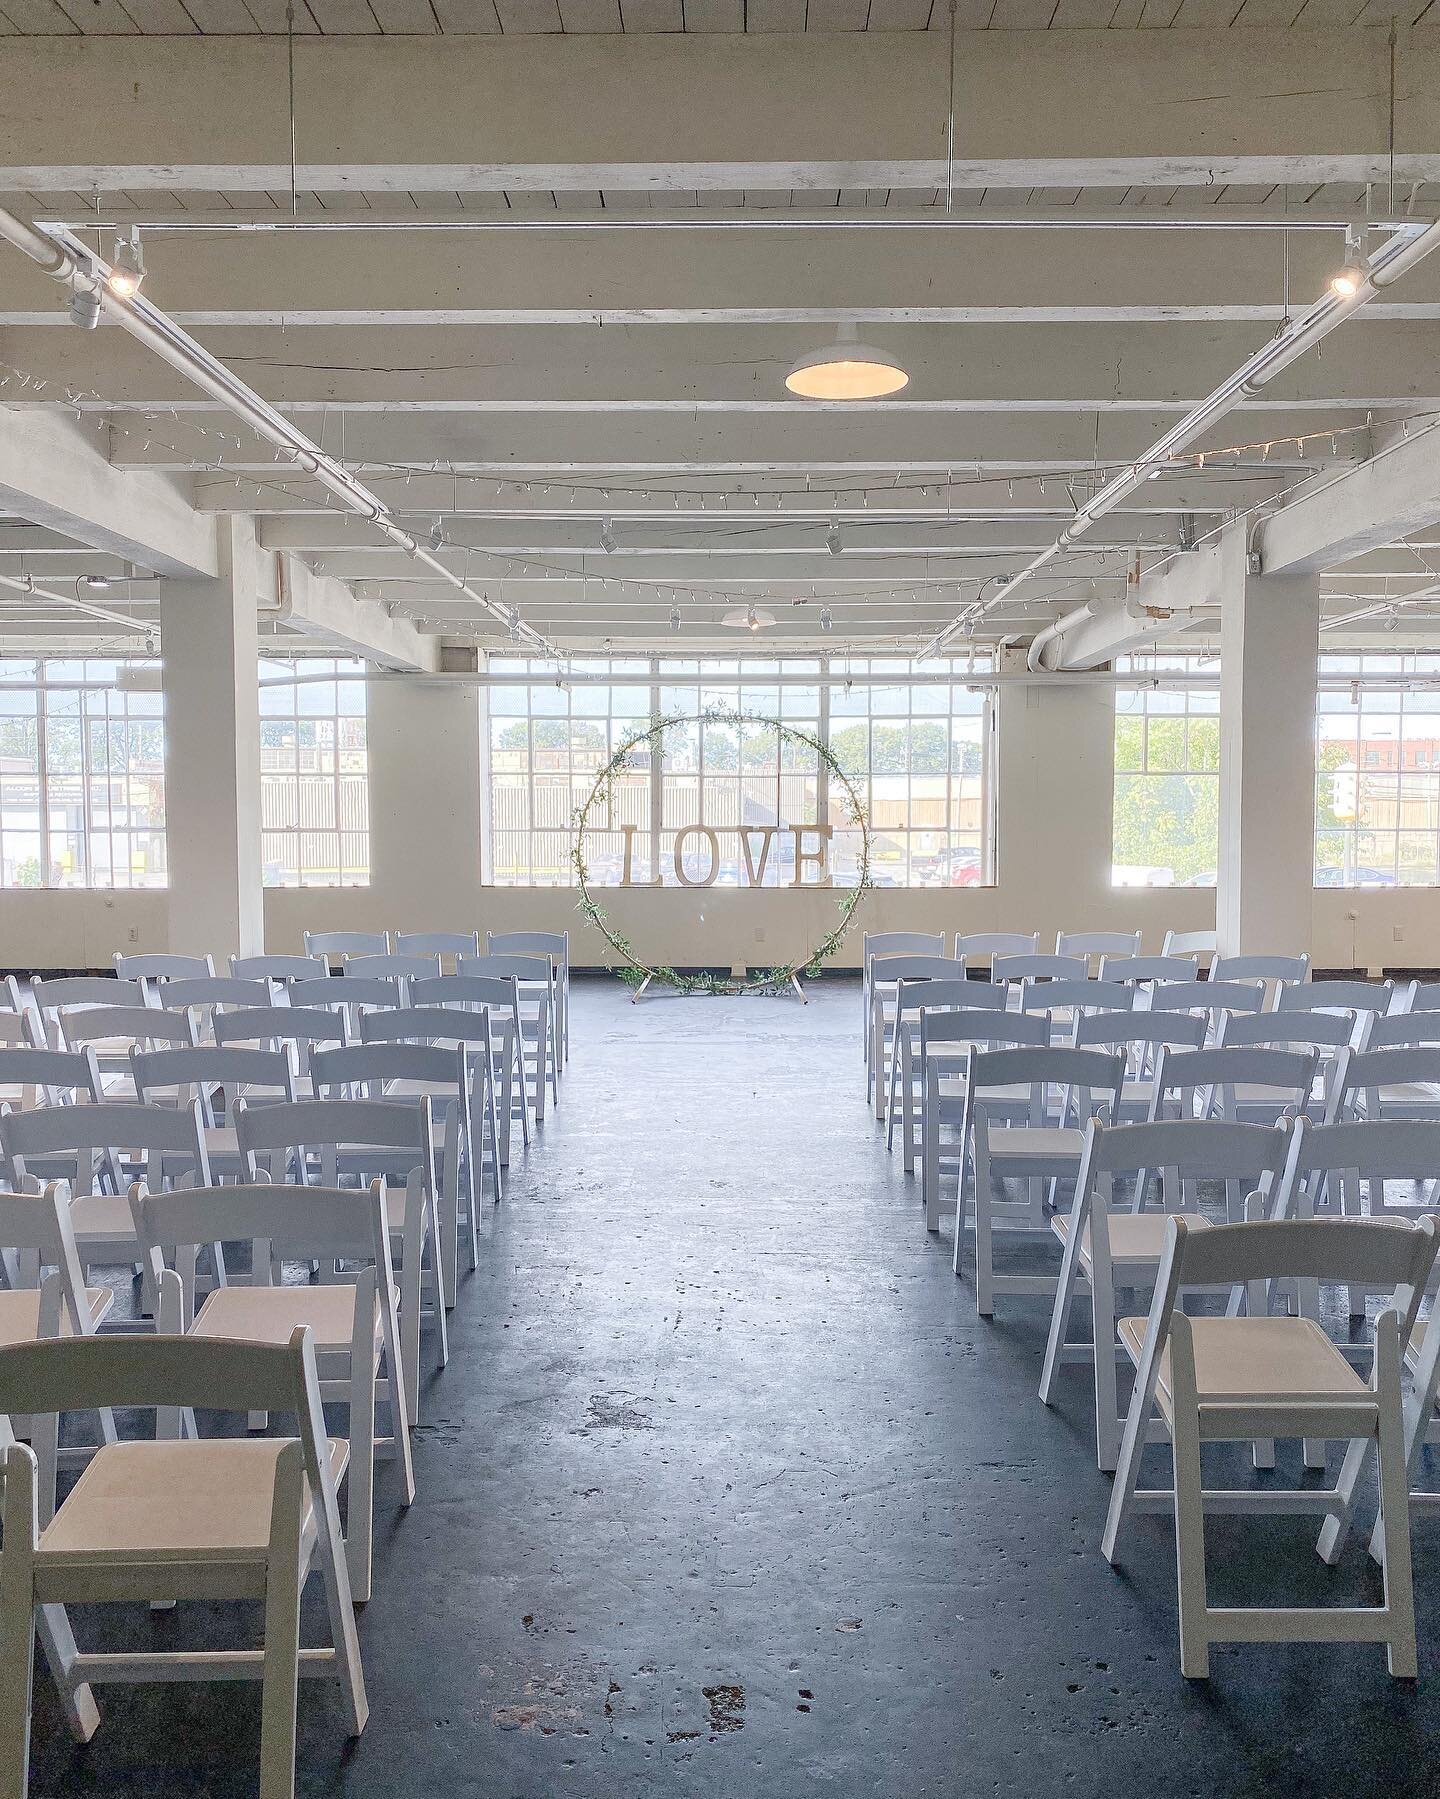 Our first floor venue, smartspace, is a lovely location for wedding ceremonies and receptions! 

Are you recently engaged and looking for a venue you can conveniently host your entire wedding celebration in? Reach out, we&rsquo;d love to schedule a t